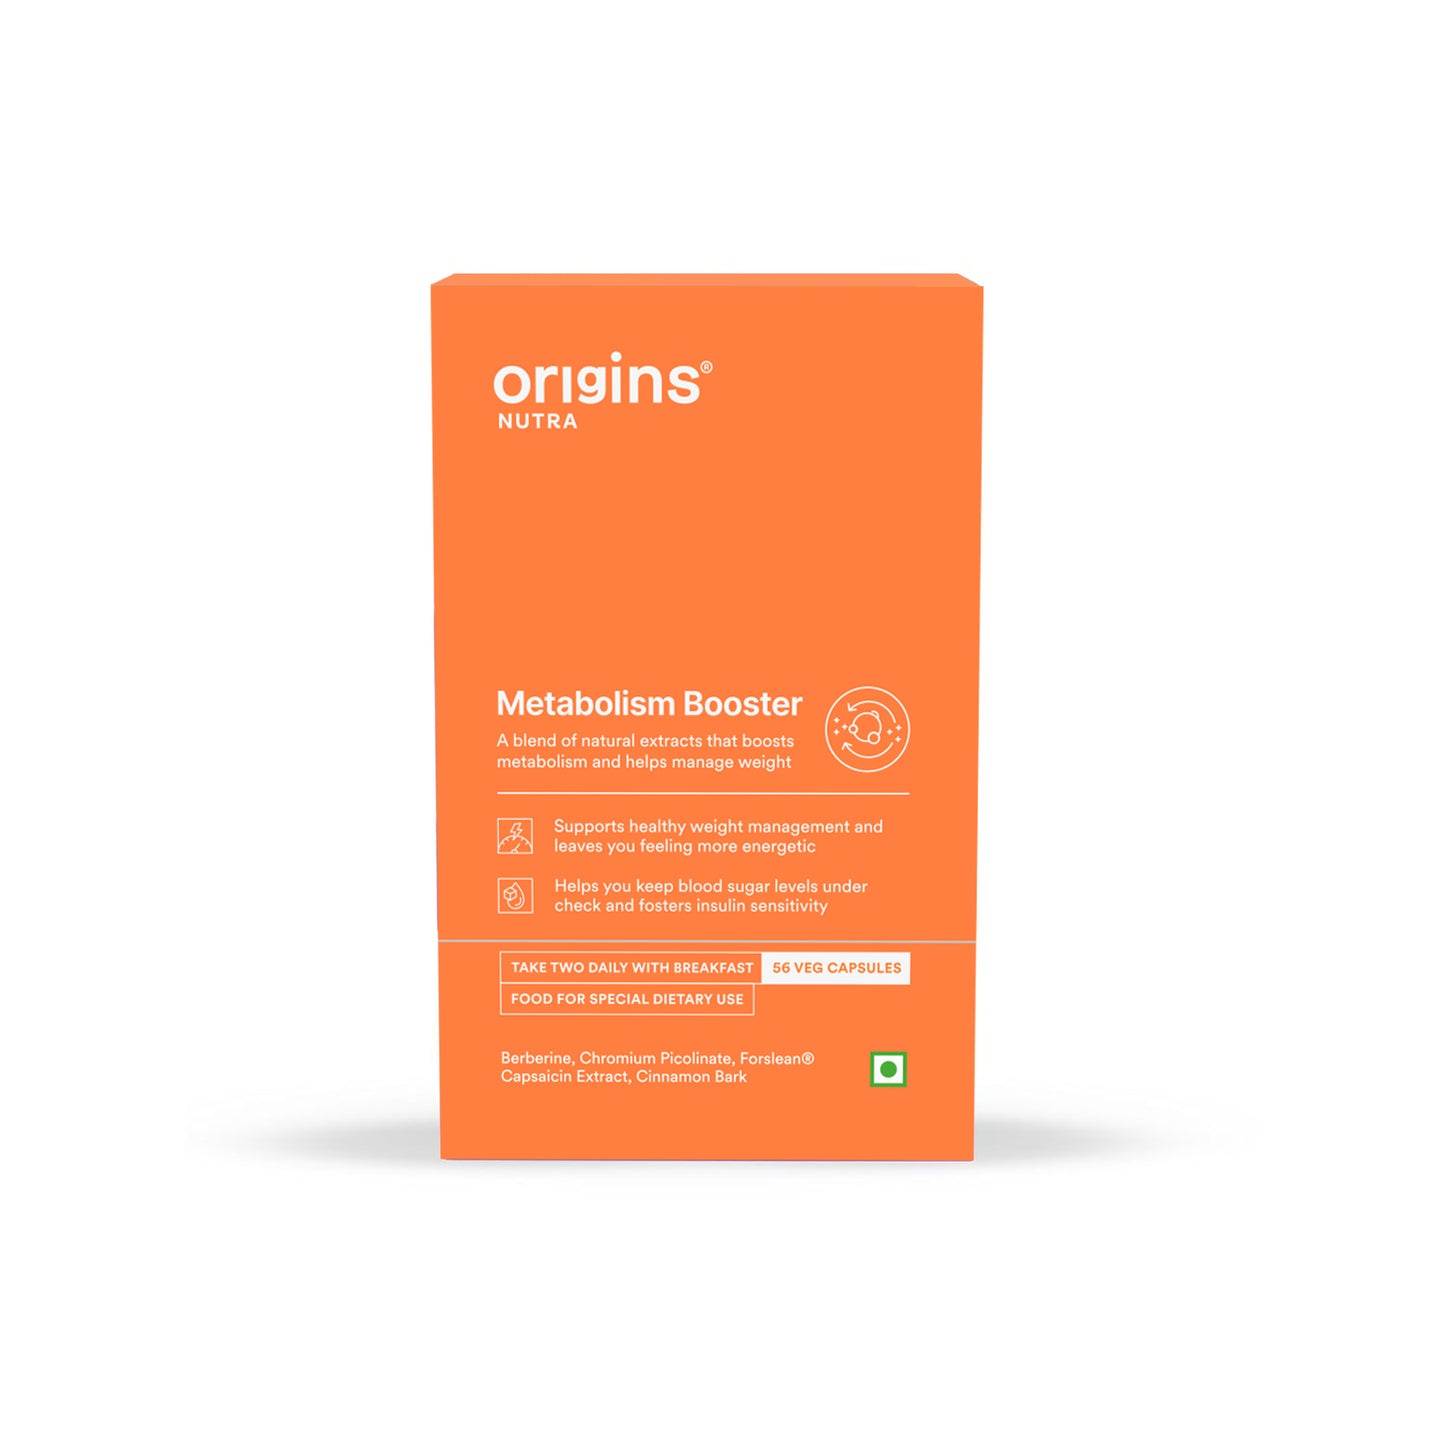 Origins Nutra Metabolism Booster Capsules|Weight Management|Leaner Body Composition| Helps Manage Healthy Weight| GMO-Free| GMP Certified| For Men & Women| 56 Veg Capsules| Pack of 3